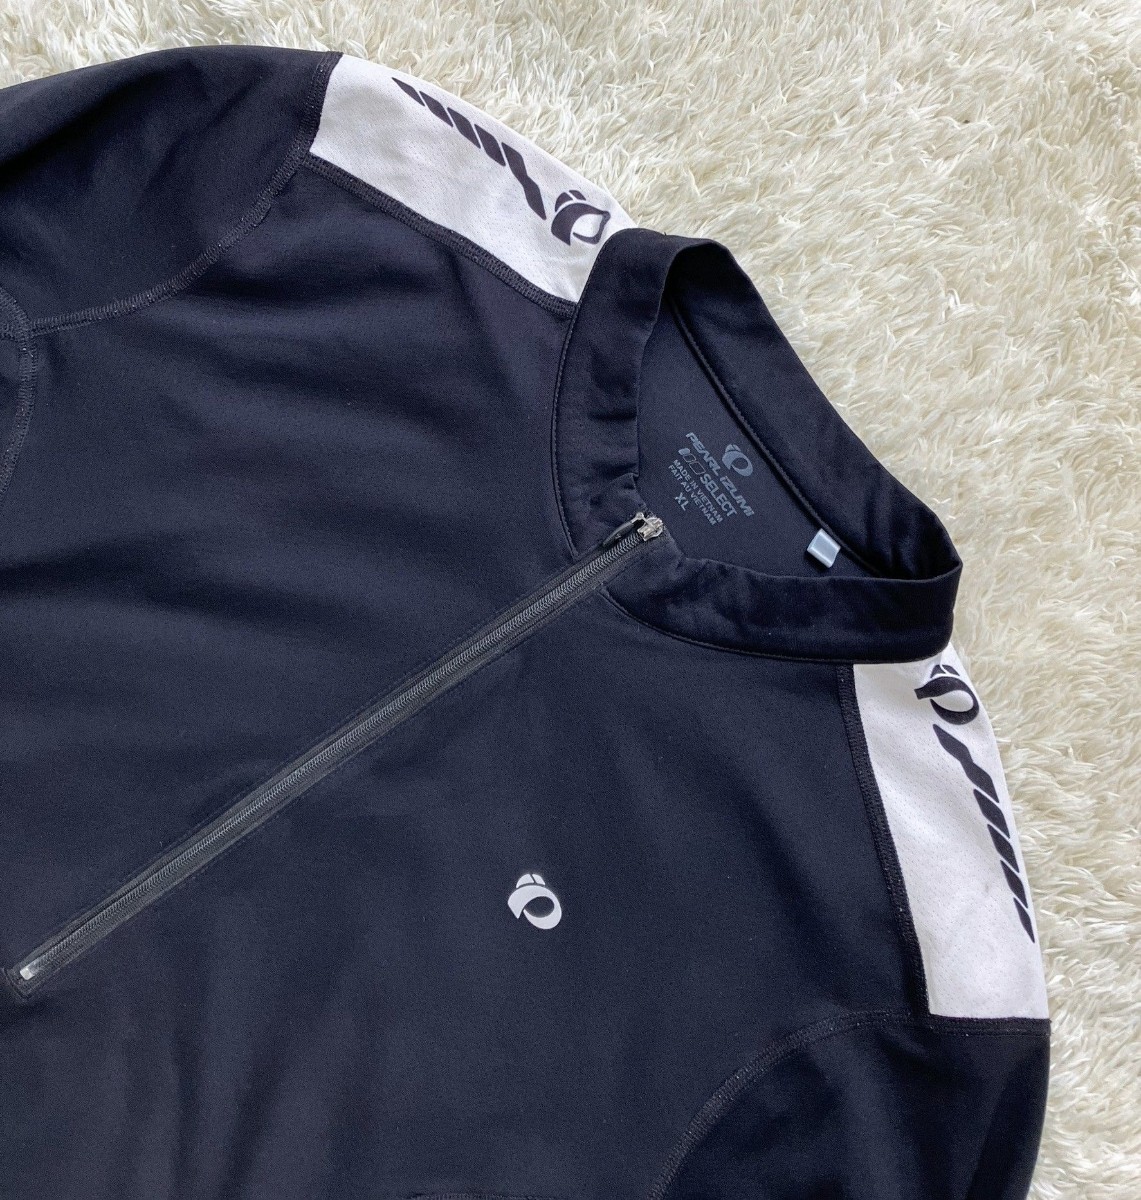 [ large size XL]PEARL IZUMI half Zip cycle jersey / black * a little damage equipped ^ pearl izmi(2)